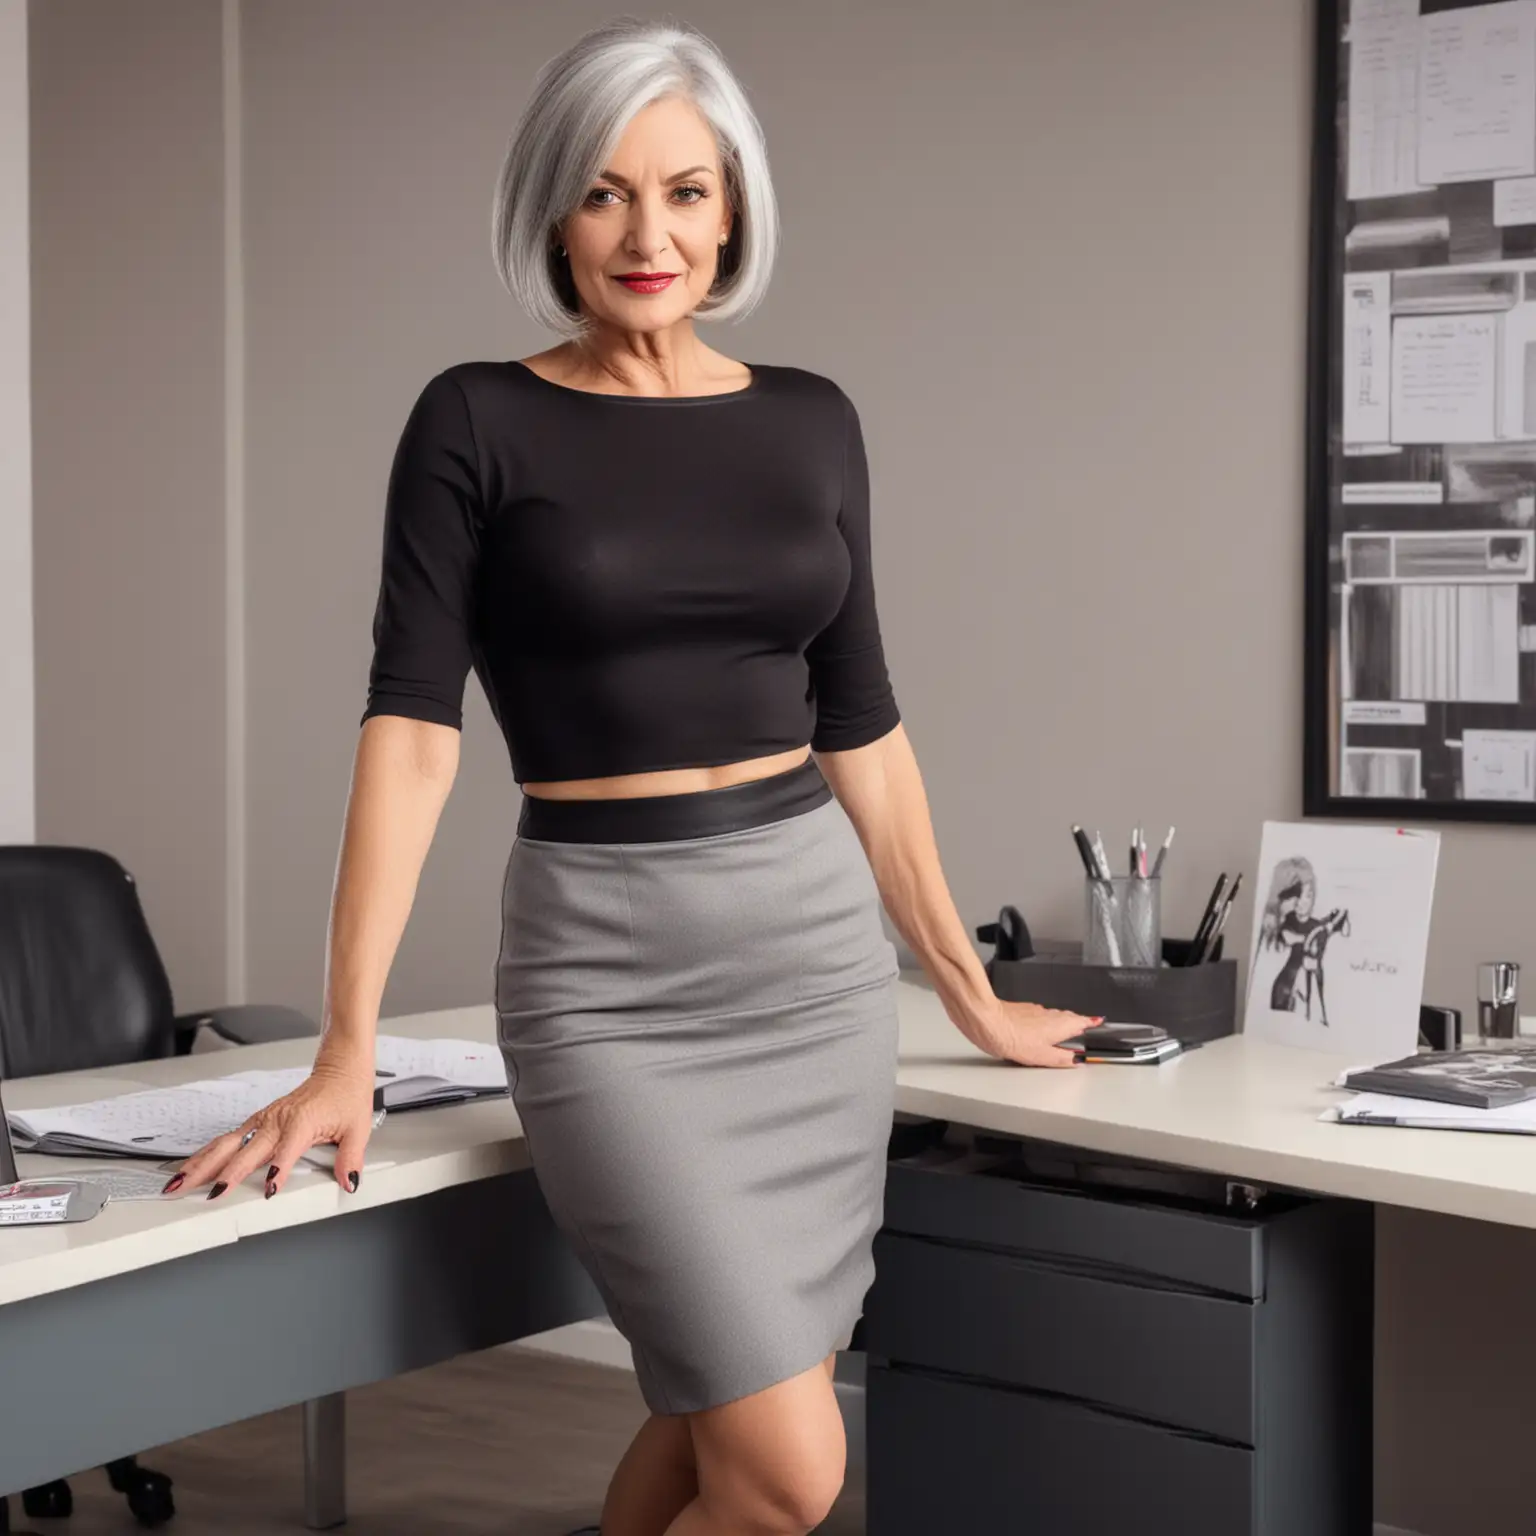 Elegant Mature Woman in Chic Office Attire Leaning on Desk